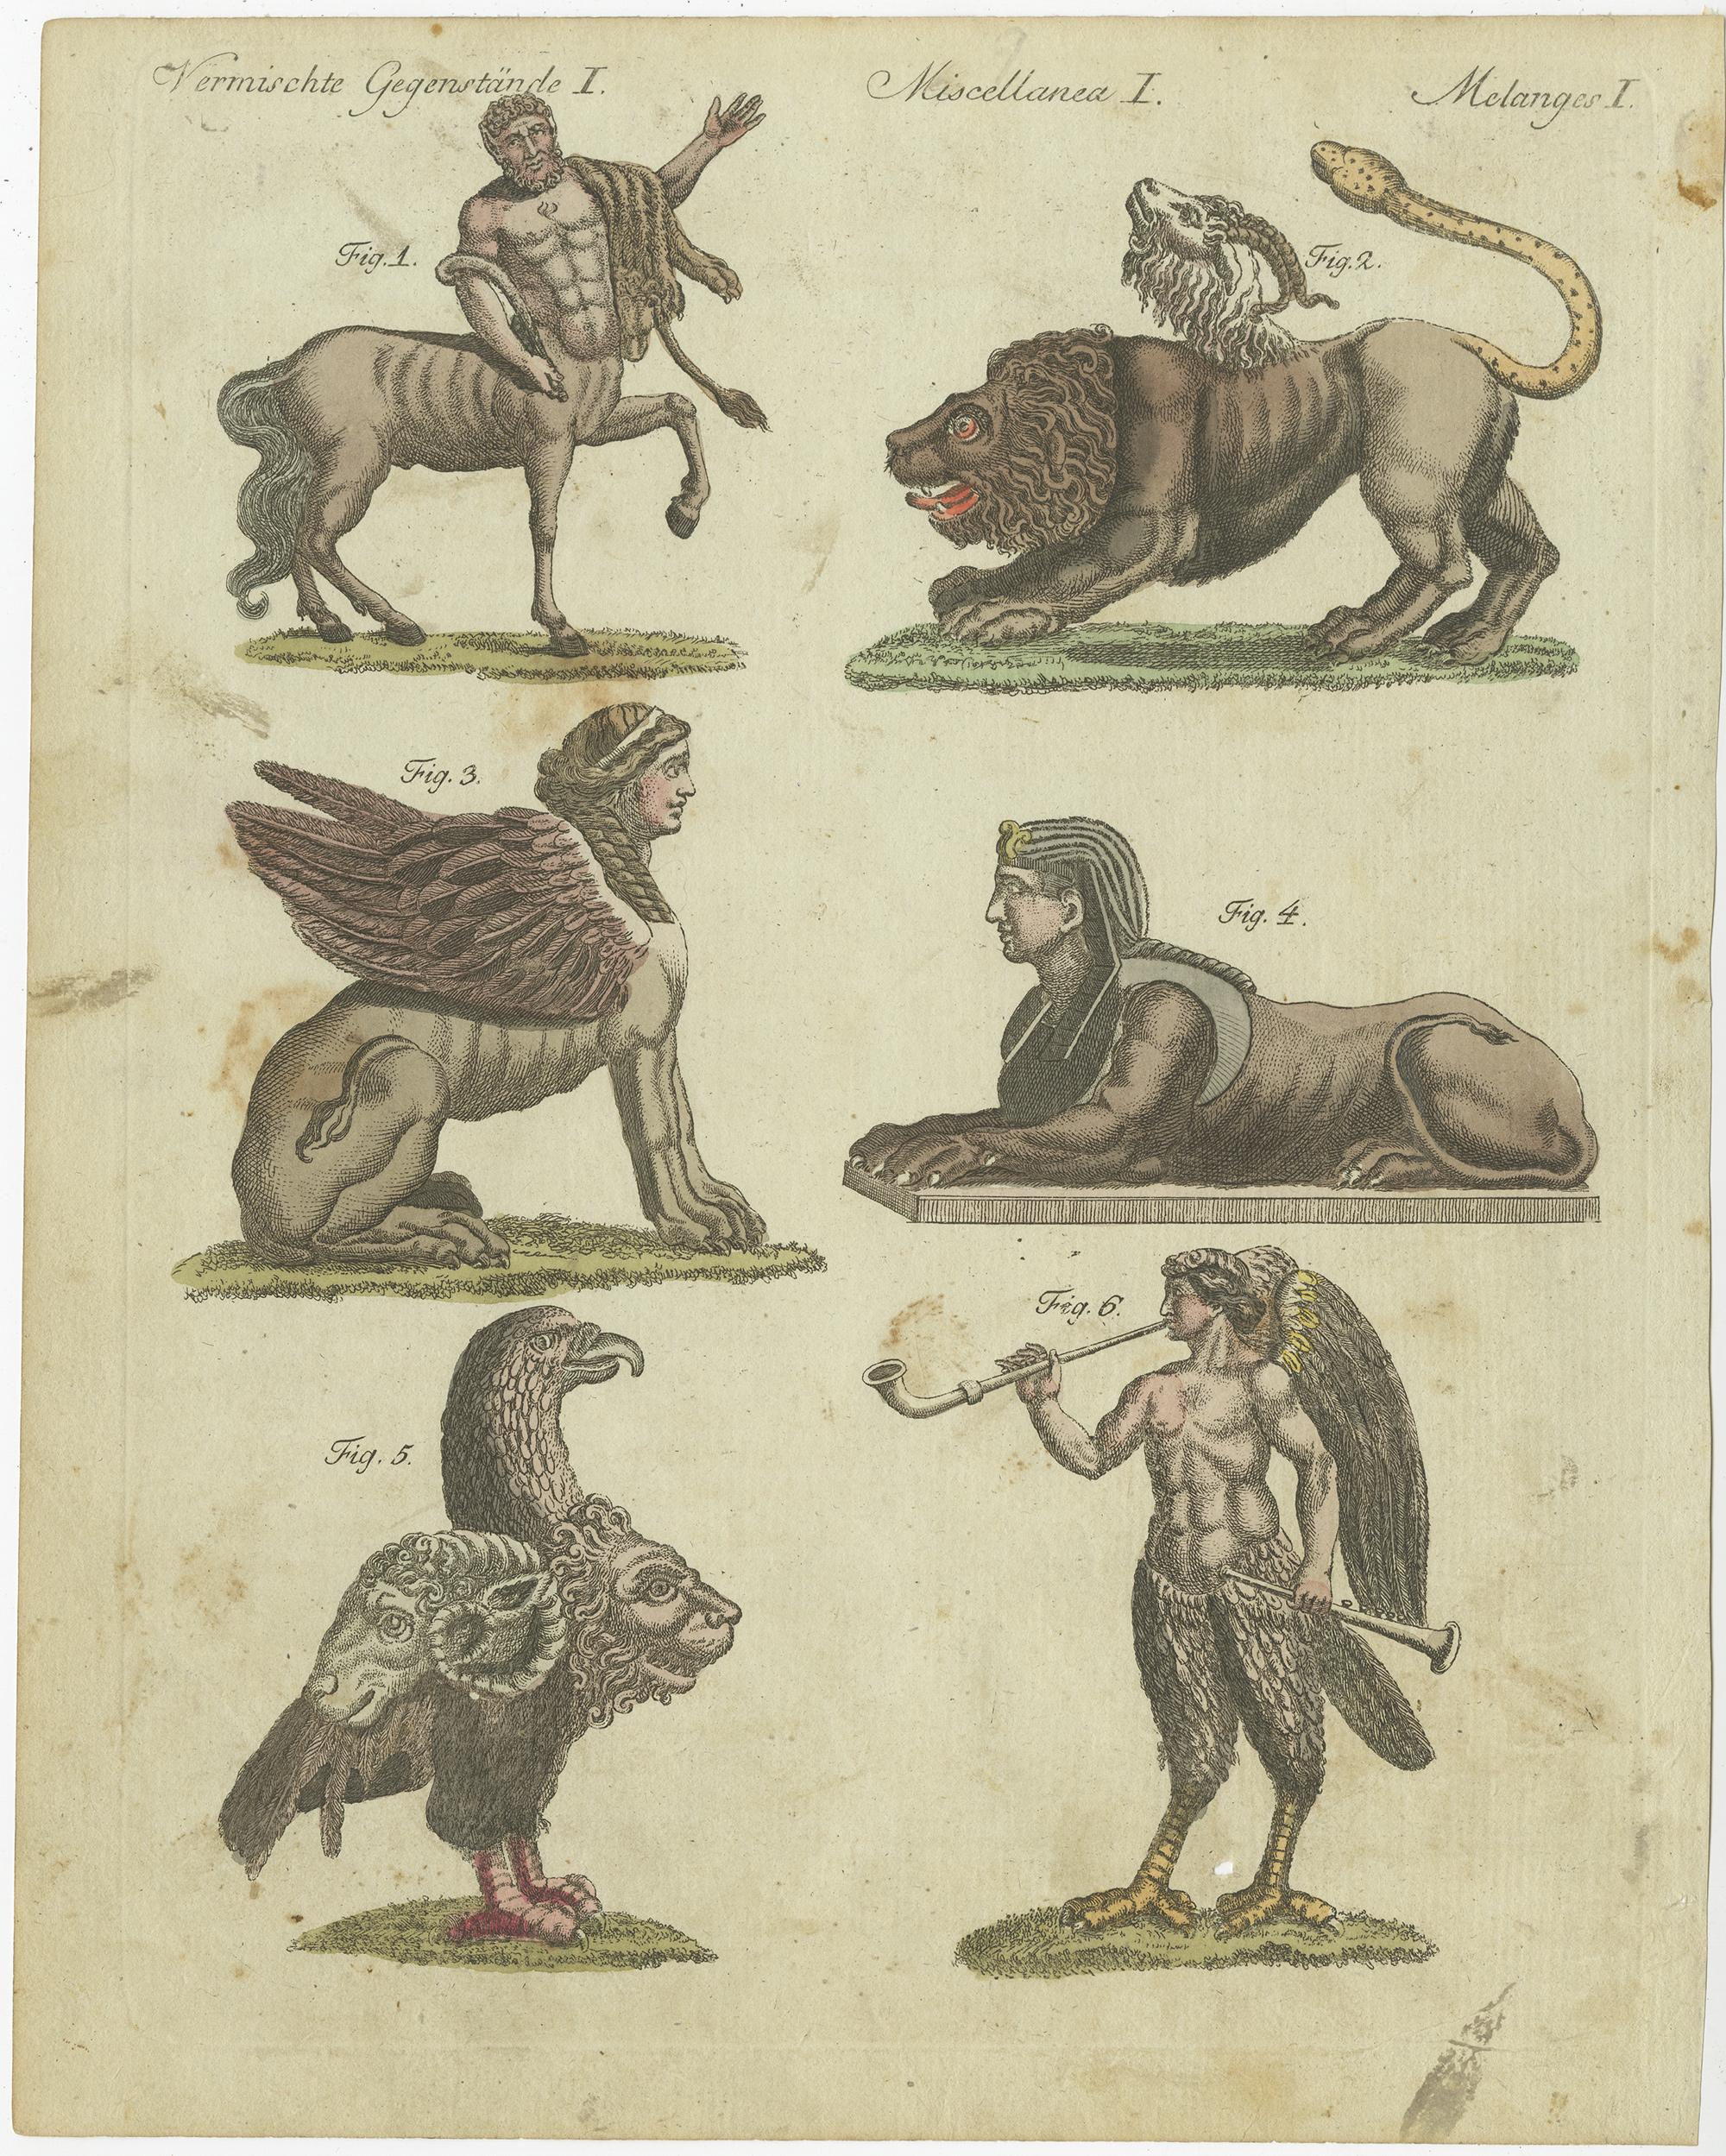 19th Century Antique Print of Fabulous Animals, incl the Spinx, Sirens and Gryllus,  ca. 1800